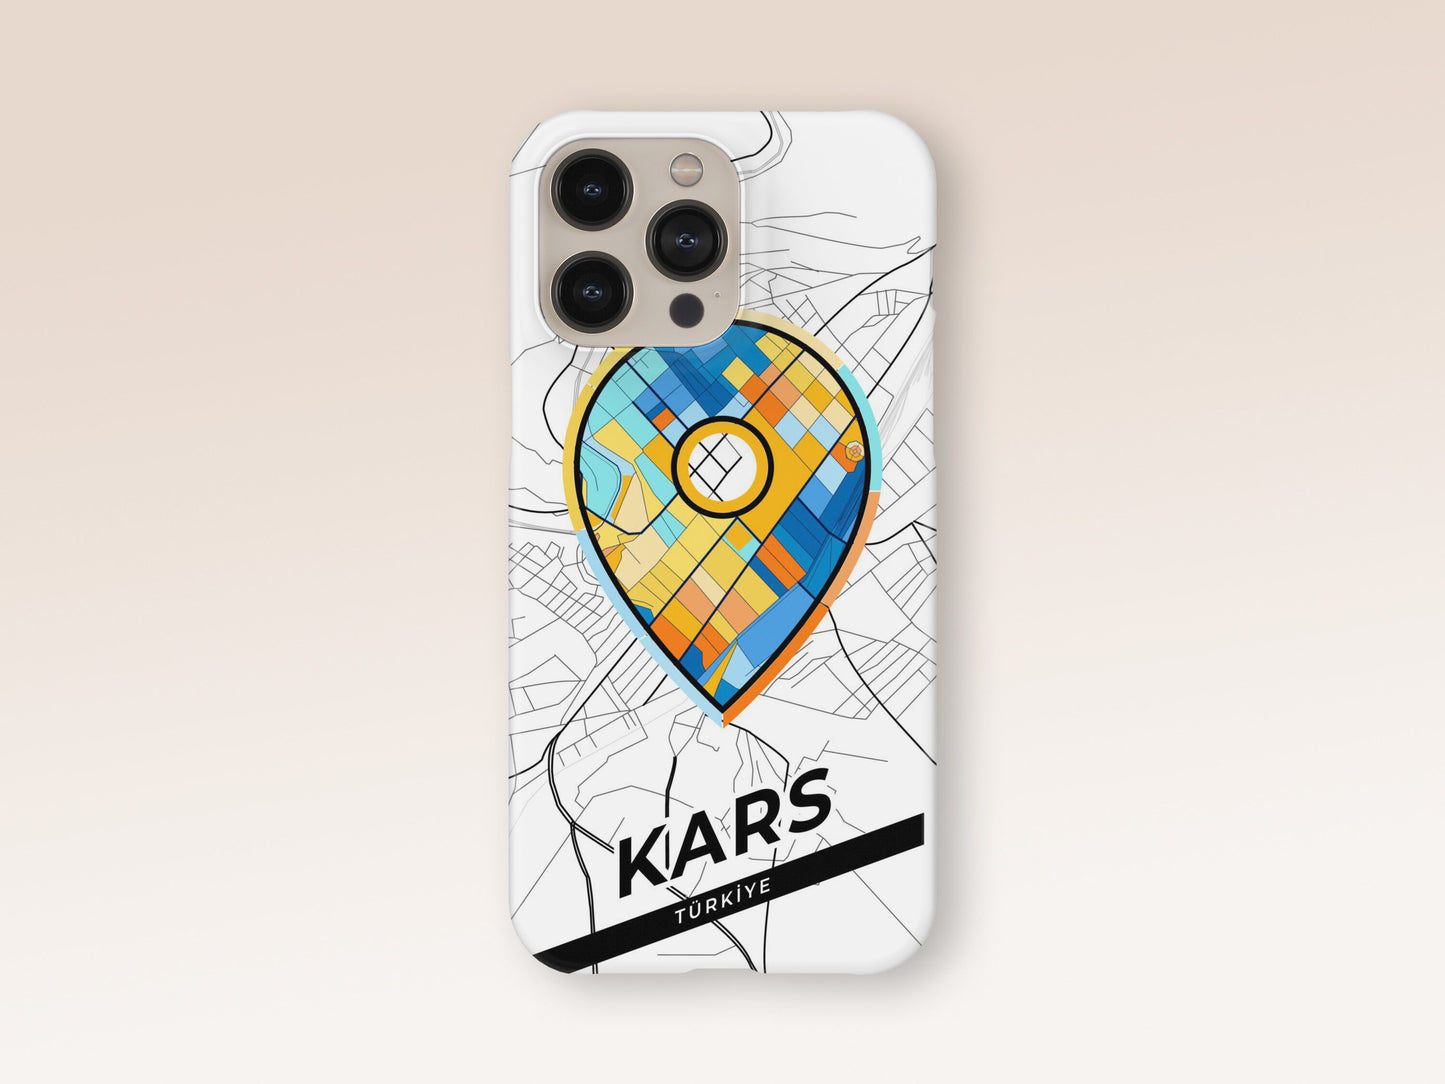 Kars Turkey slim phone case with colorful icon. Birthday, wedding or housewarming gift. Couple match cases. 1